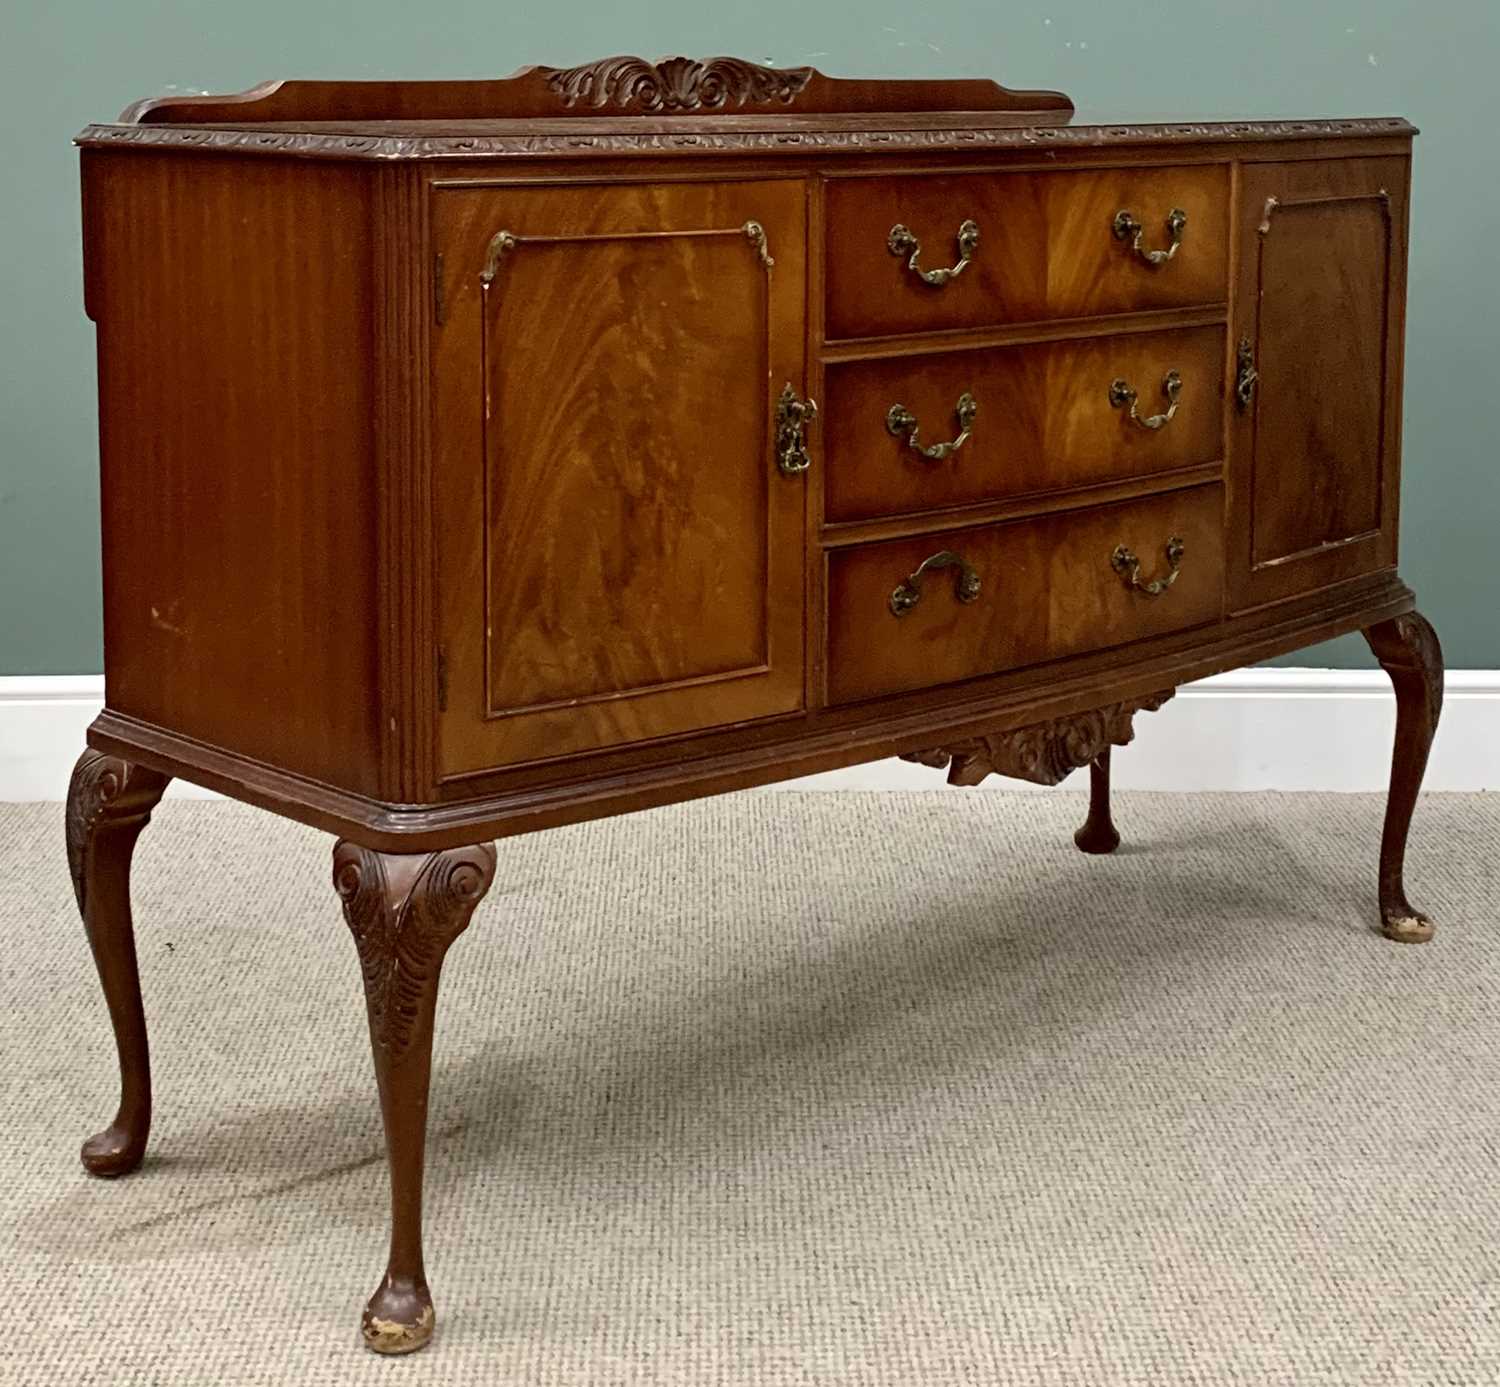 MAHOGANY RAILBACK SIDEBOARD - 20th Century in Regency style with three central drawers and two - Image 3 of 5